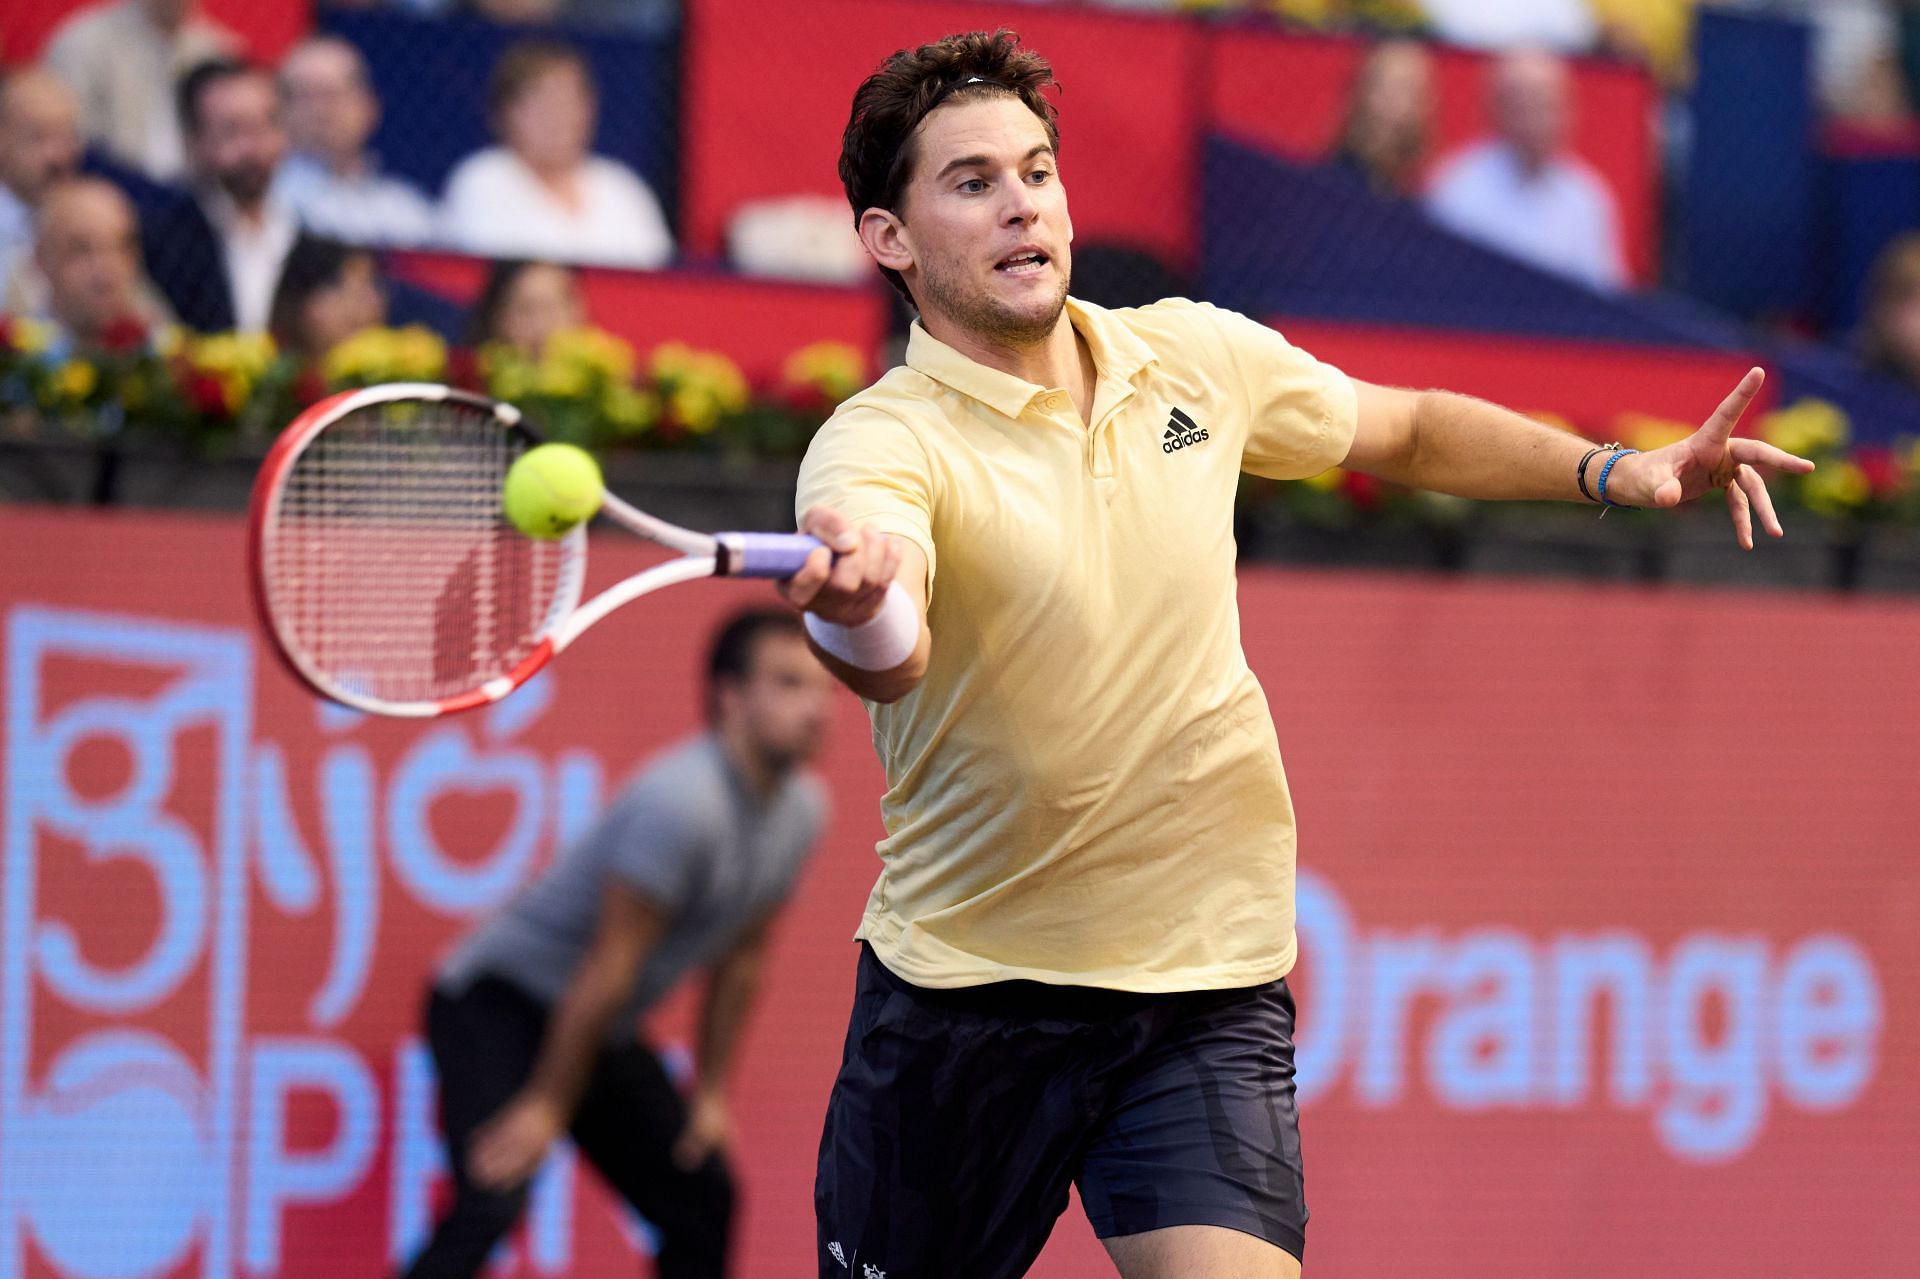 Dominic Thiem plays a forehand in his semi-final match against Andrey Rublev at the 2022 Gijon Open